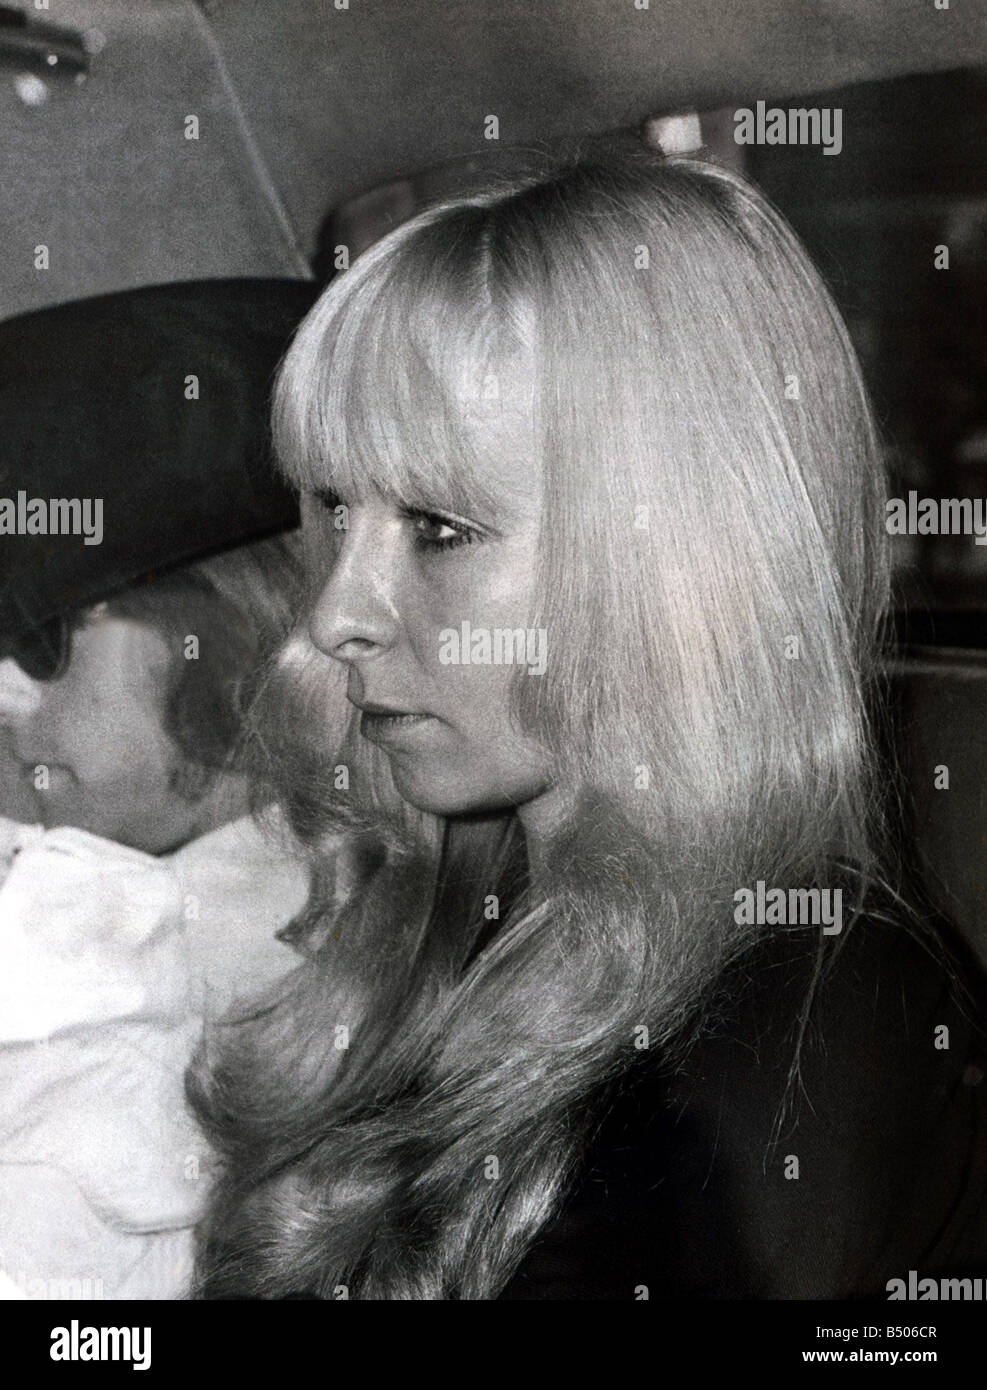 Inquest on Jimmy Hendrix Monika Dannemann girlfriend of Jimmy Hendrix leaving the inquest into the musician s death Stock Photo